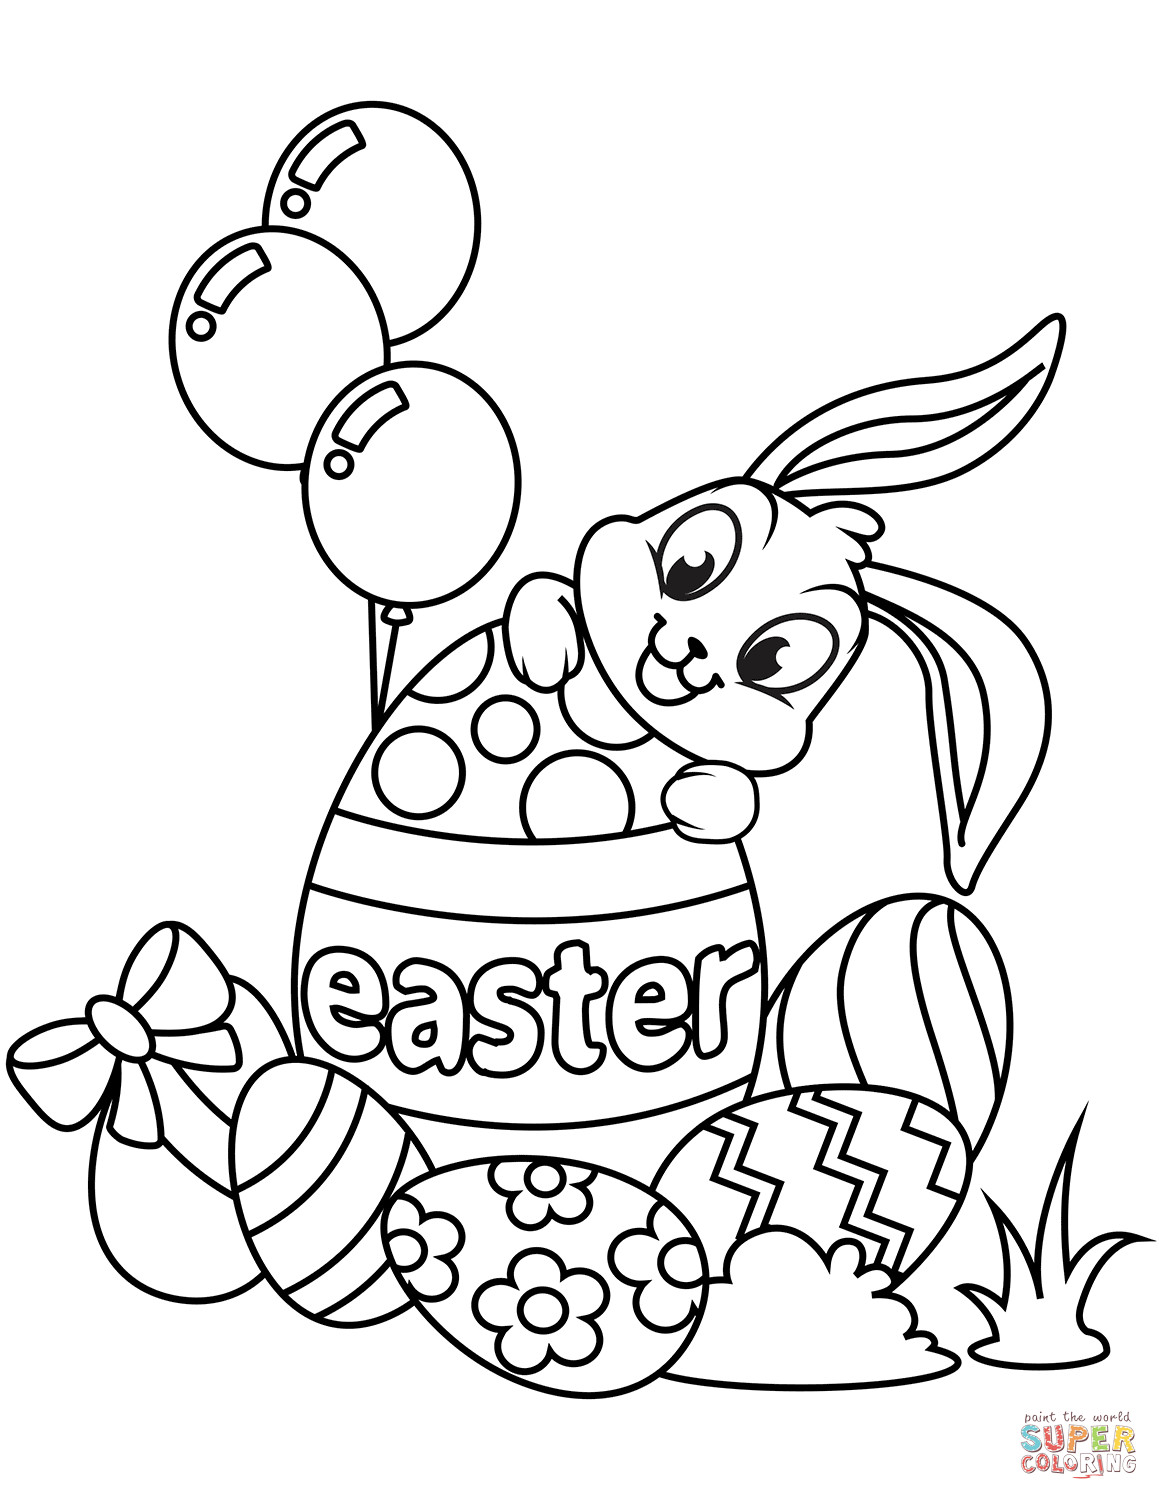 Easter Bunny Free Printable Coloring Pages
 Cute Easter Bunny and Eggs coloring page